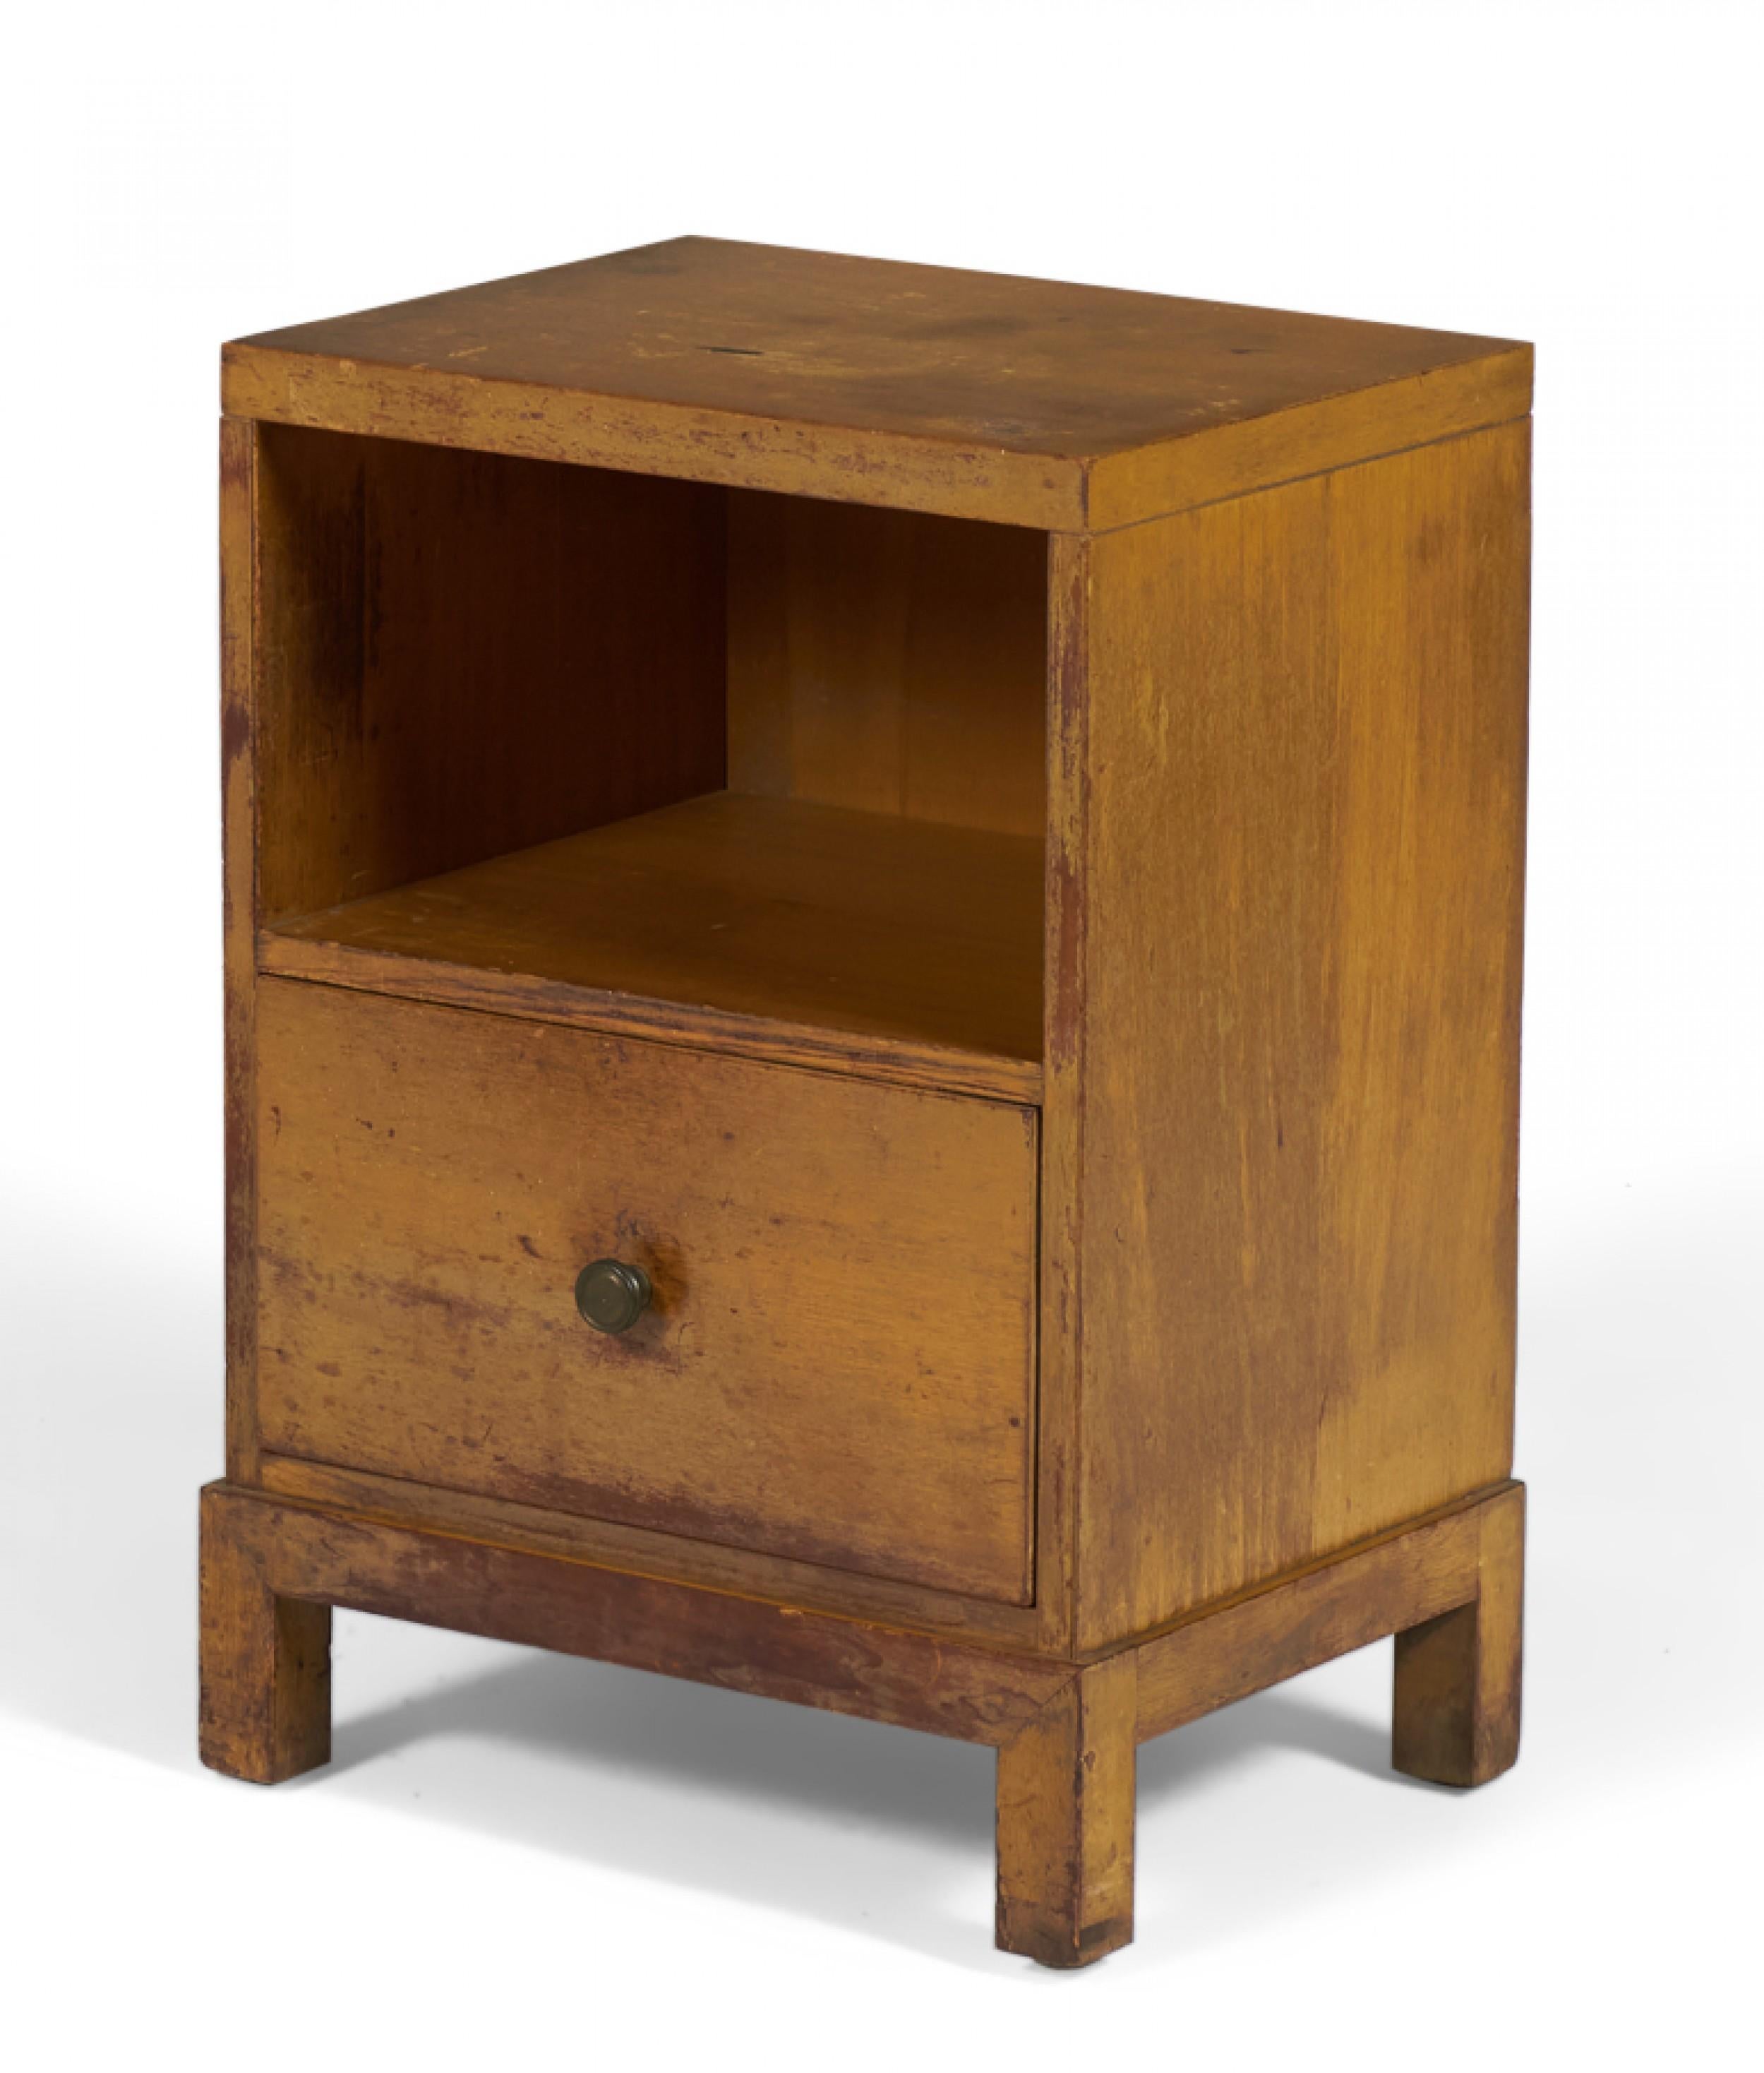 American Mid-Century (1950s) walnut nightstand with an open upper cabinet and a lower drawer with a circular metal drawer pull, resting on a square Chinese-style base. (WIDDICOMB MODERN)(Similar pieces: DUF0145A-D)
